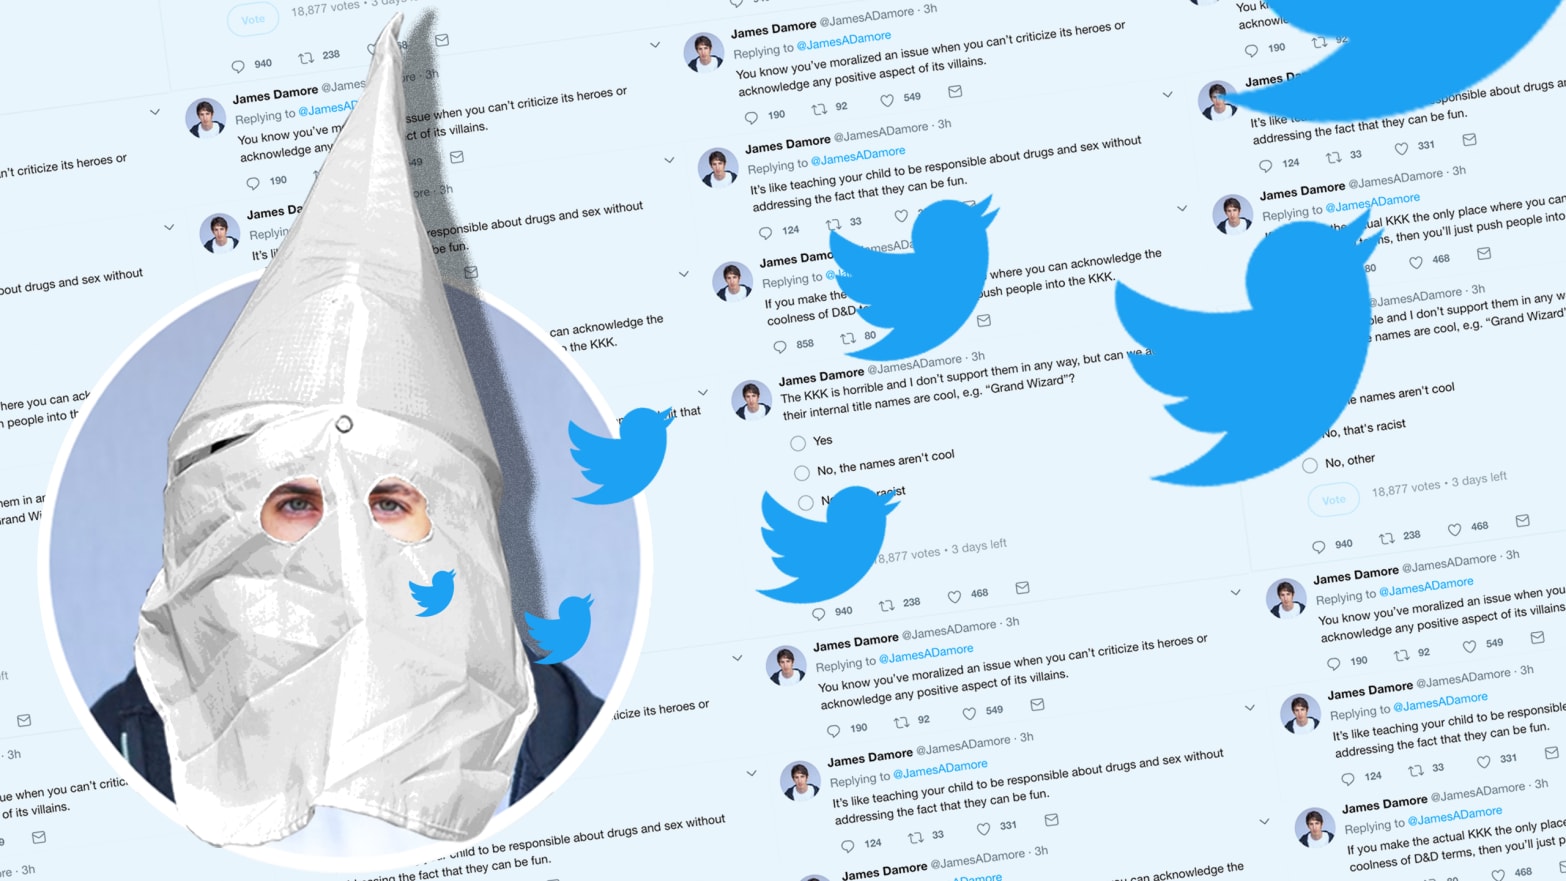 Fired Google employee James Damore tweets approvingly about the KKK.